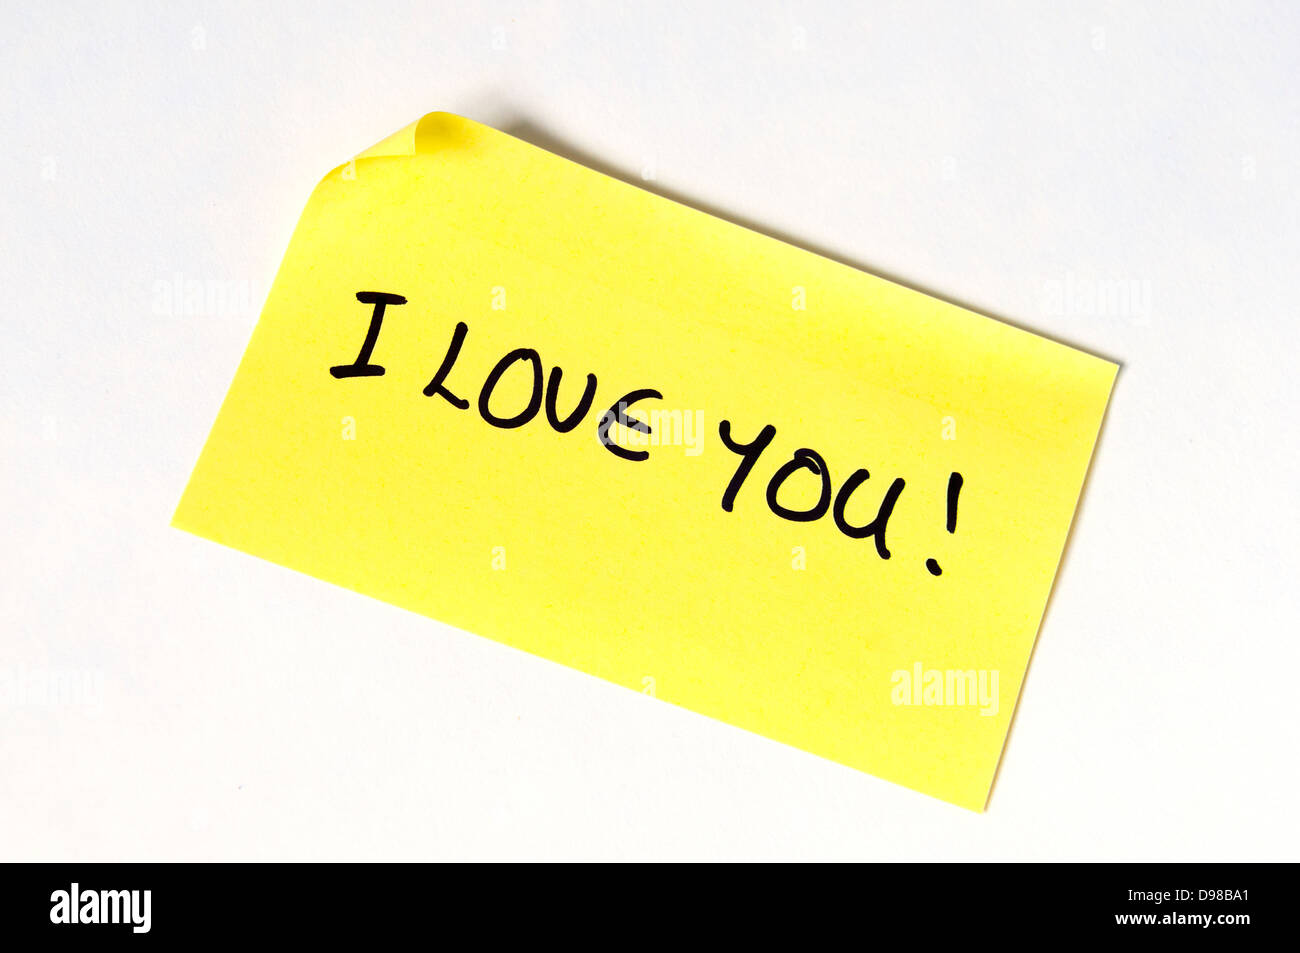 I love you! Written in capital letters on a yellow post it note. Stock Photo